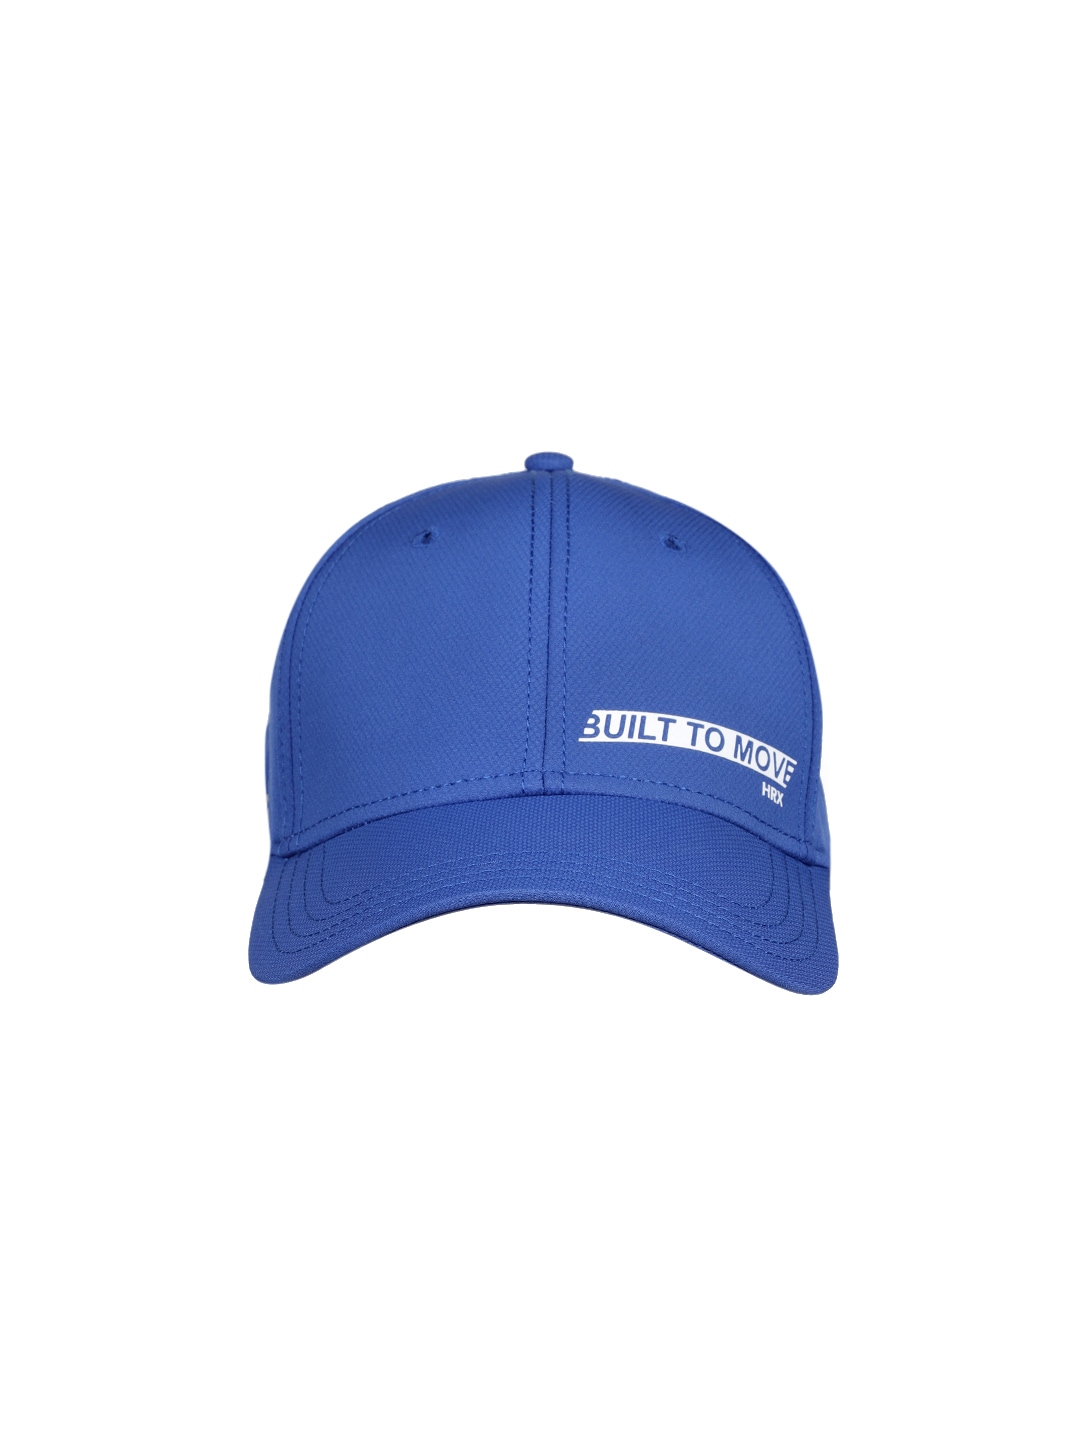 HRX by Hrithik Roshan Unisex Blue Solid Lifestyle Cap Price in India